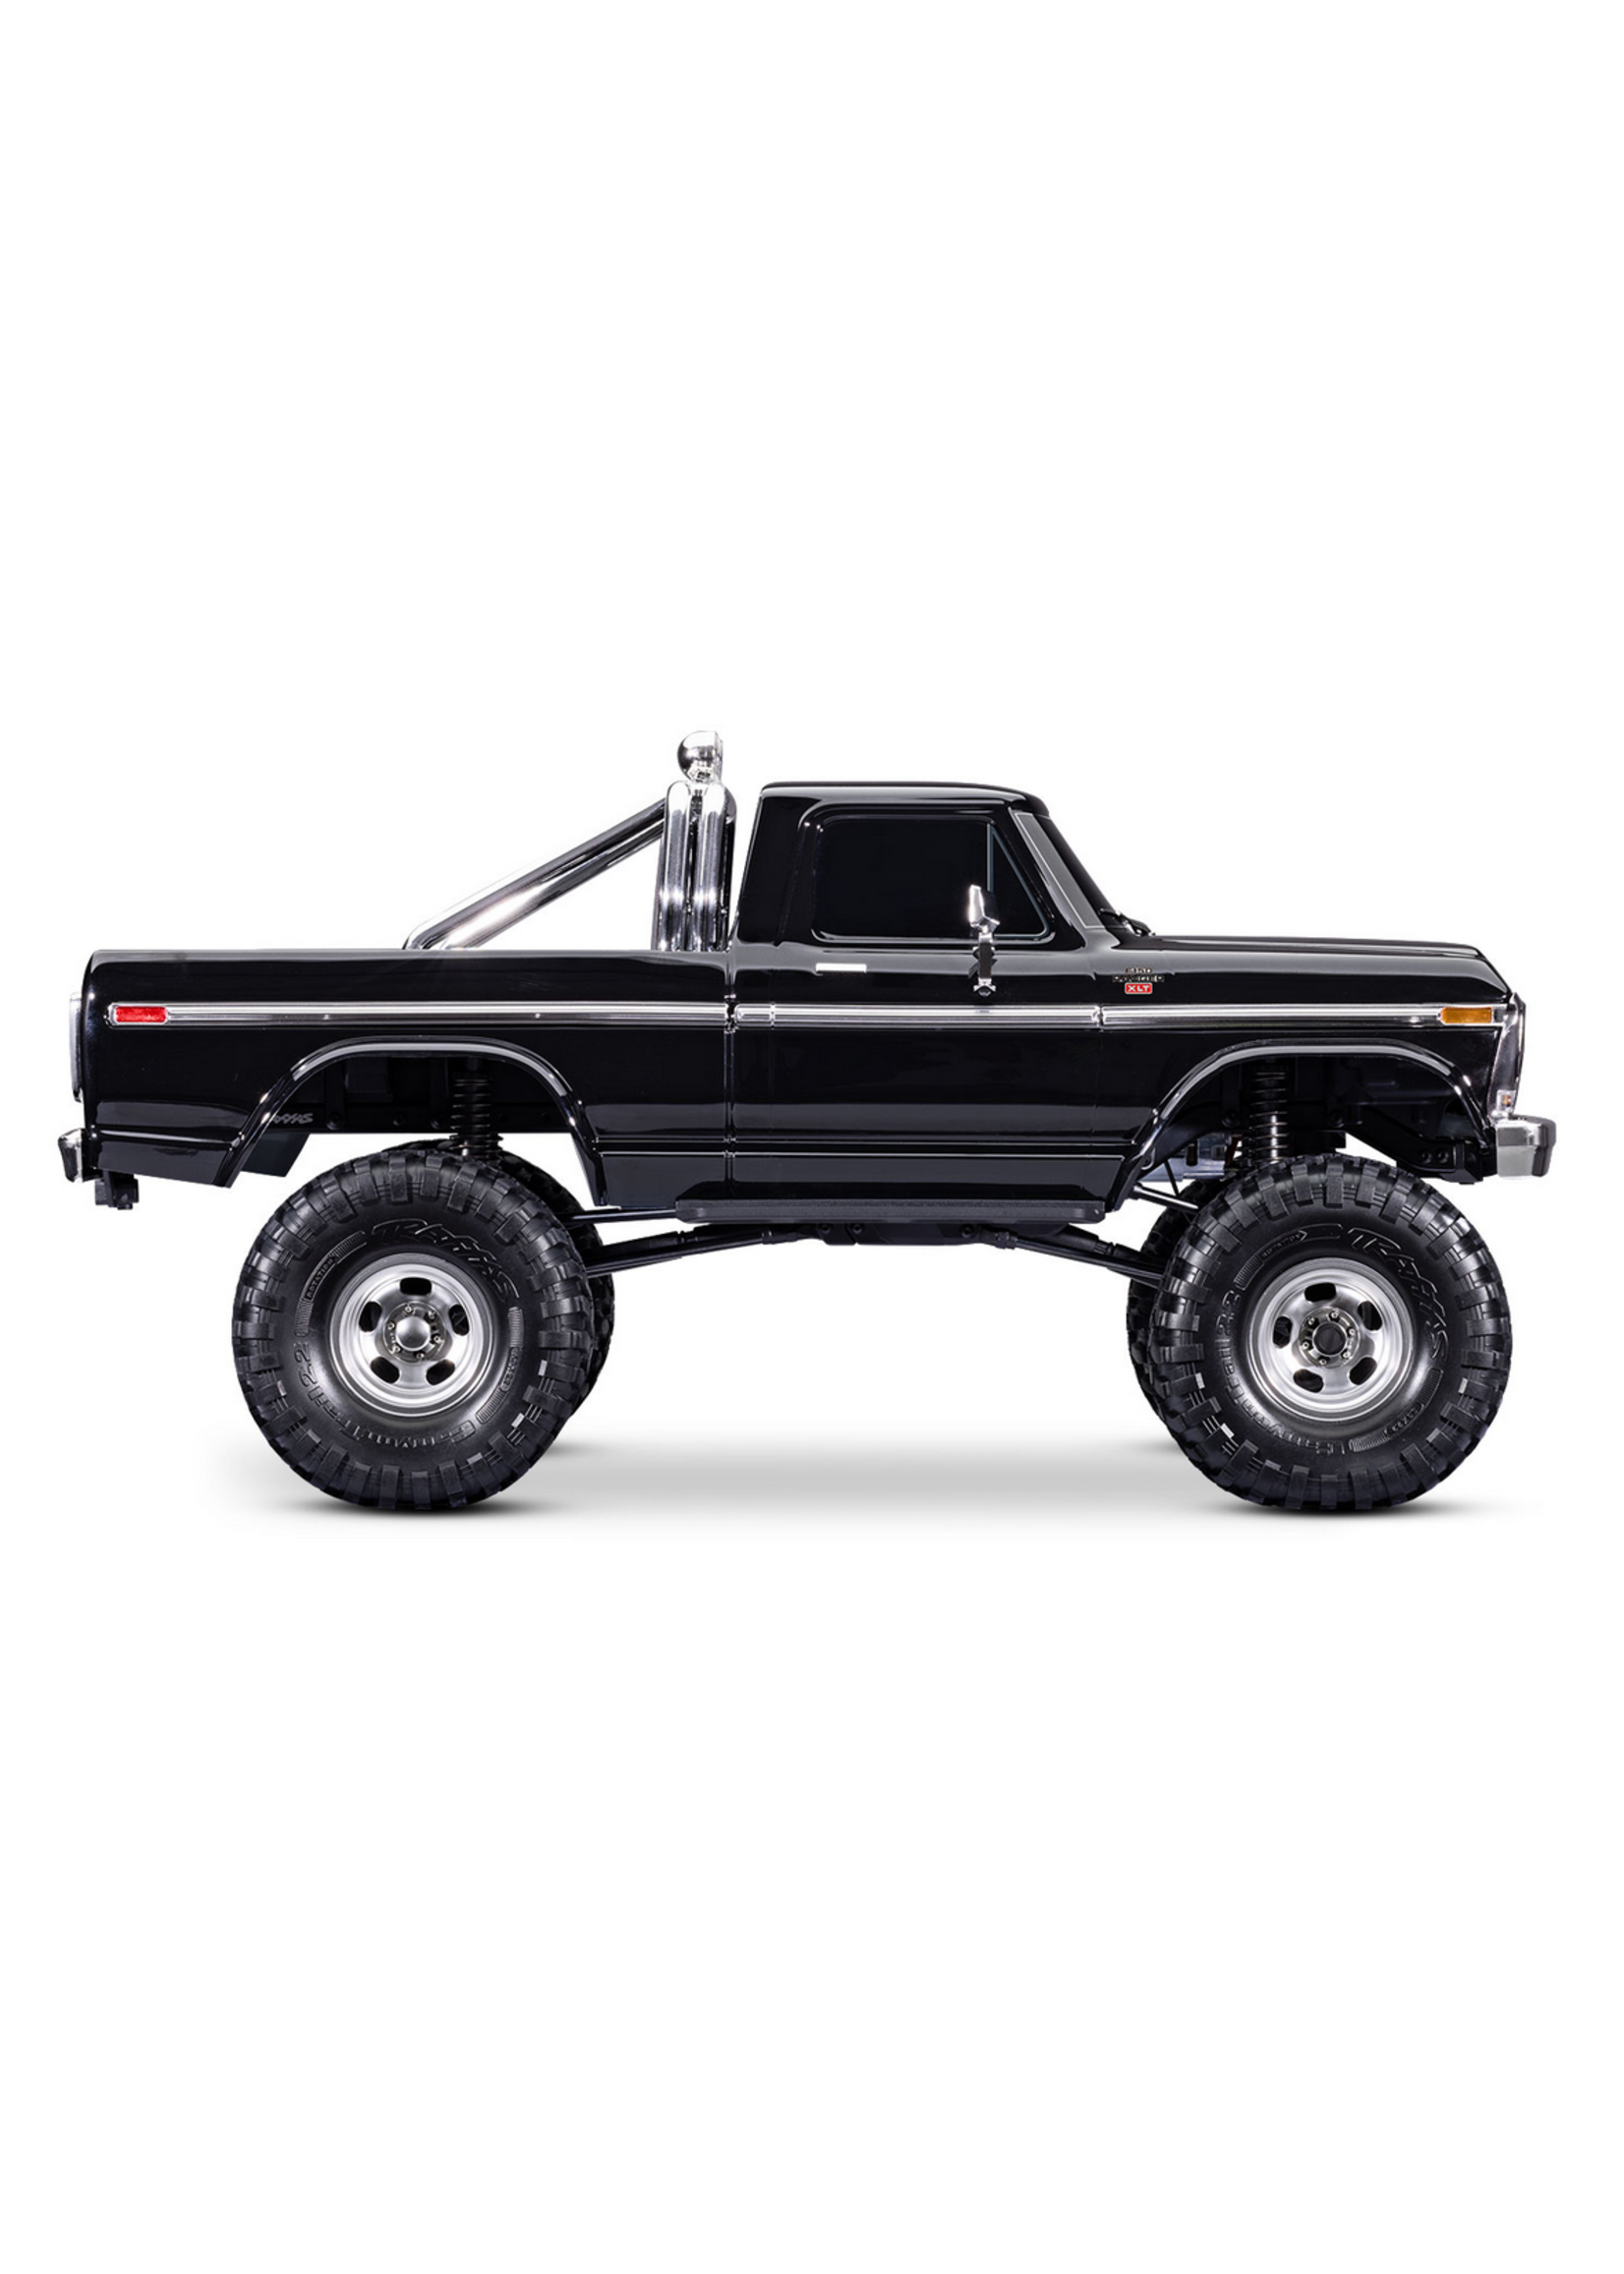 Traxxas TRA92046-4 Traxxas Scale and Trail crawler with 1979 Ford  F-150 Ranger XLT body and Long Arm Lift Kit: 1/10 scale 4WD electric truck